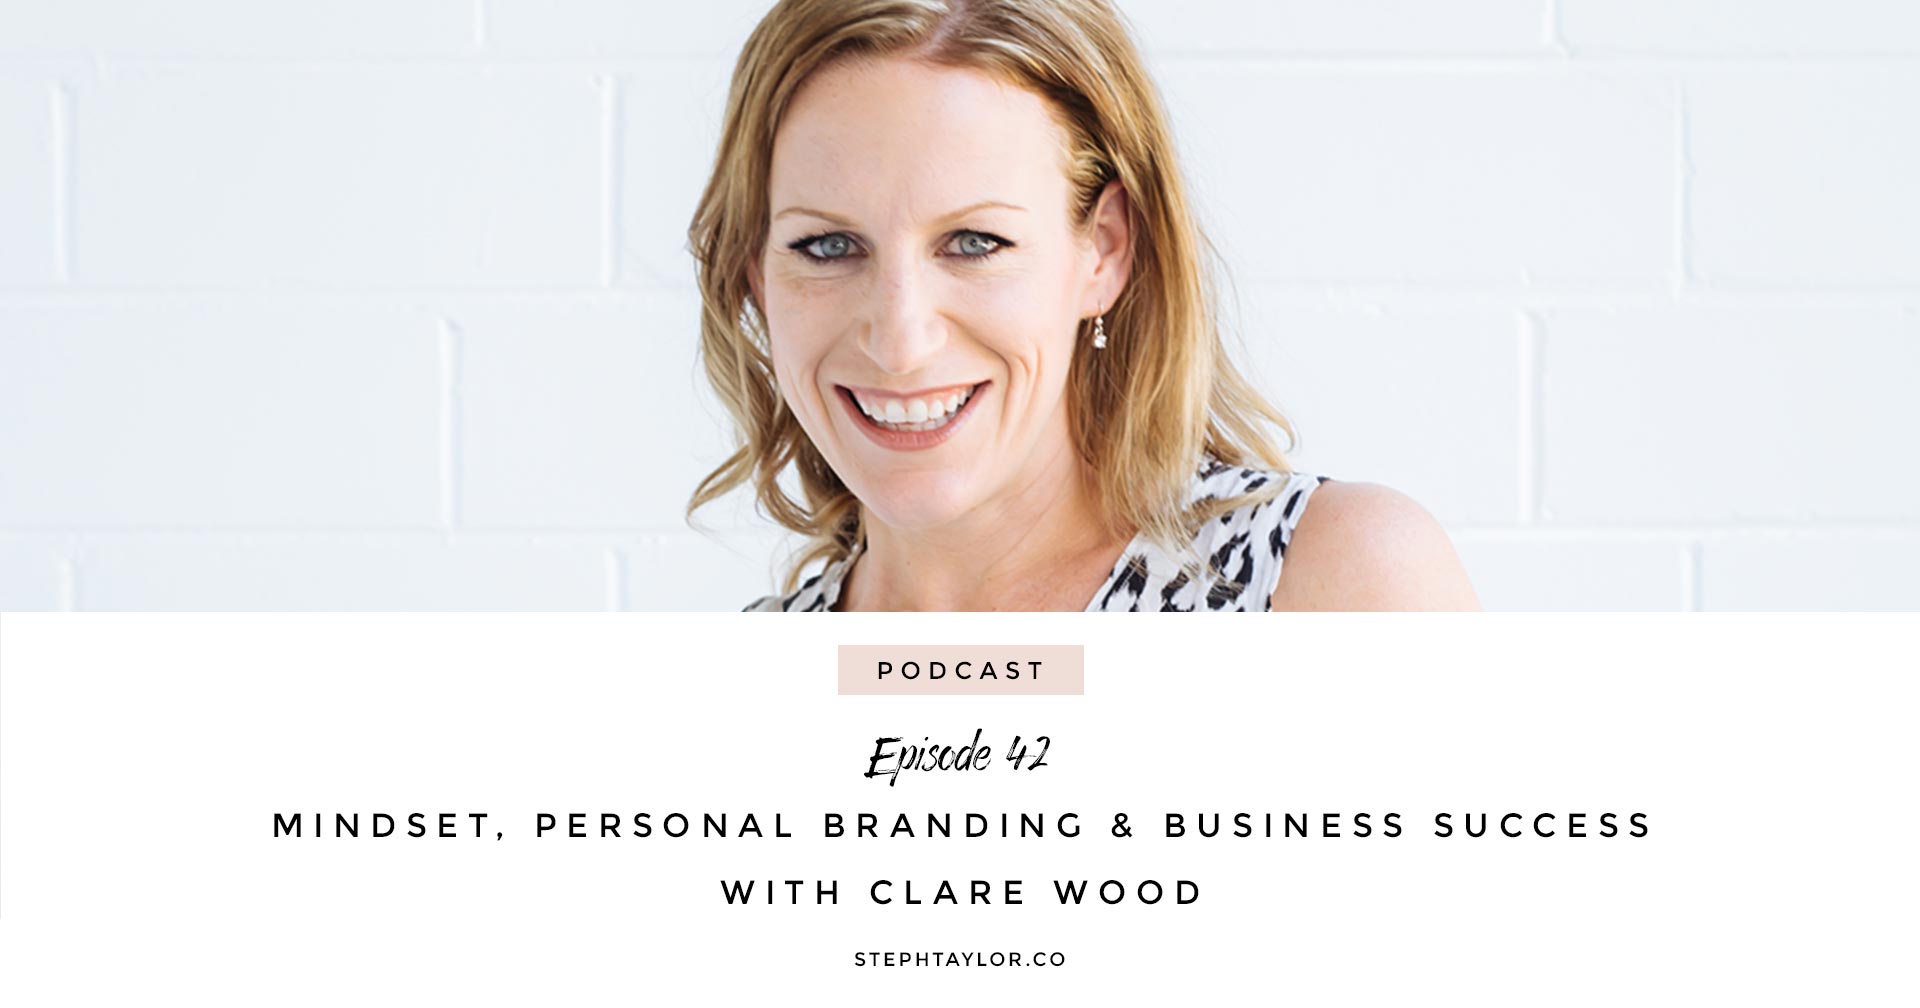 Clare Wood Business Coach